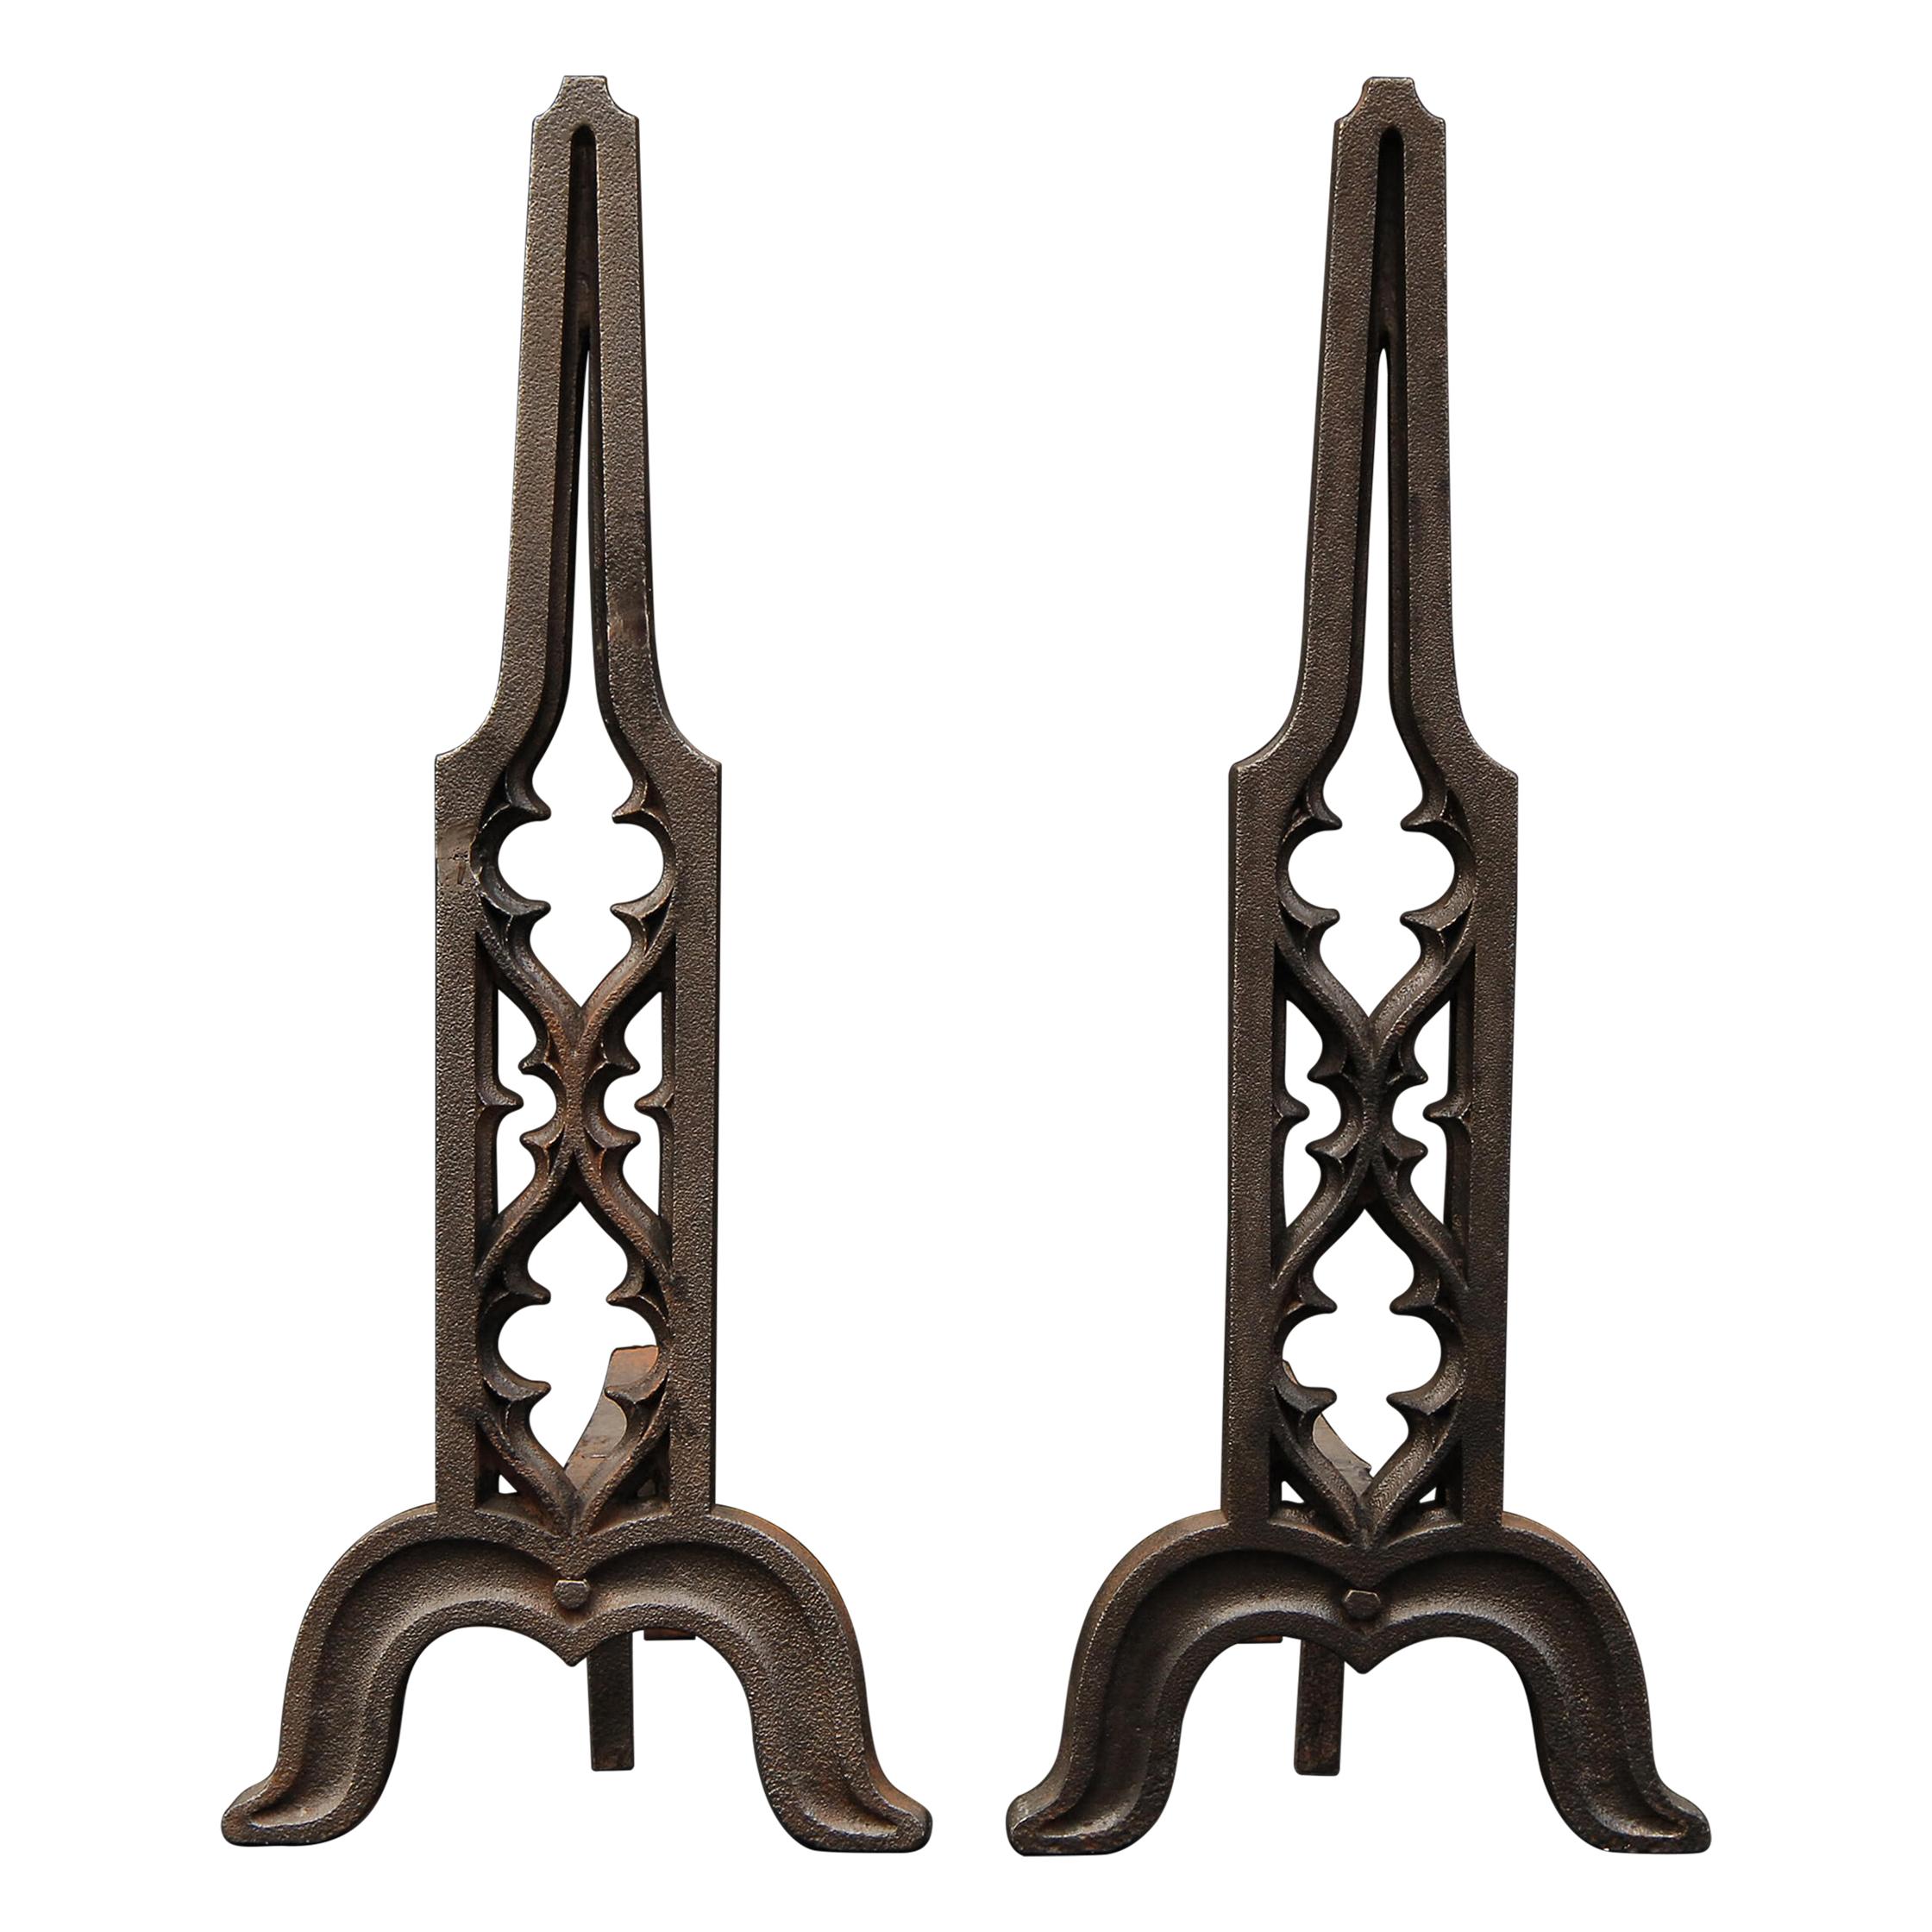 Pair of Gothic Revival Cast Iron Firedogs